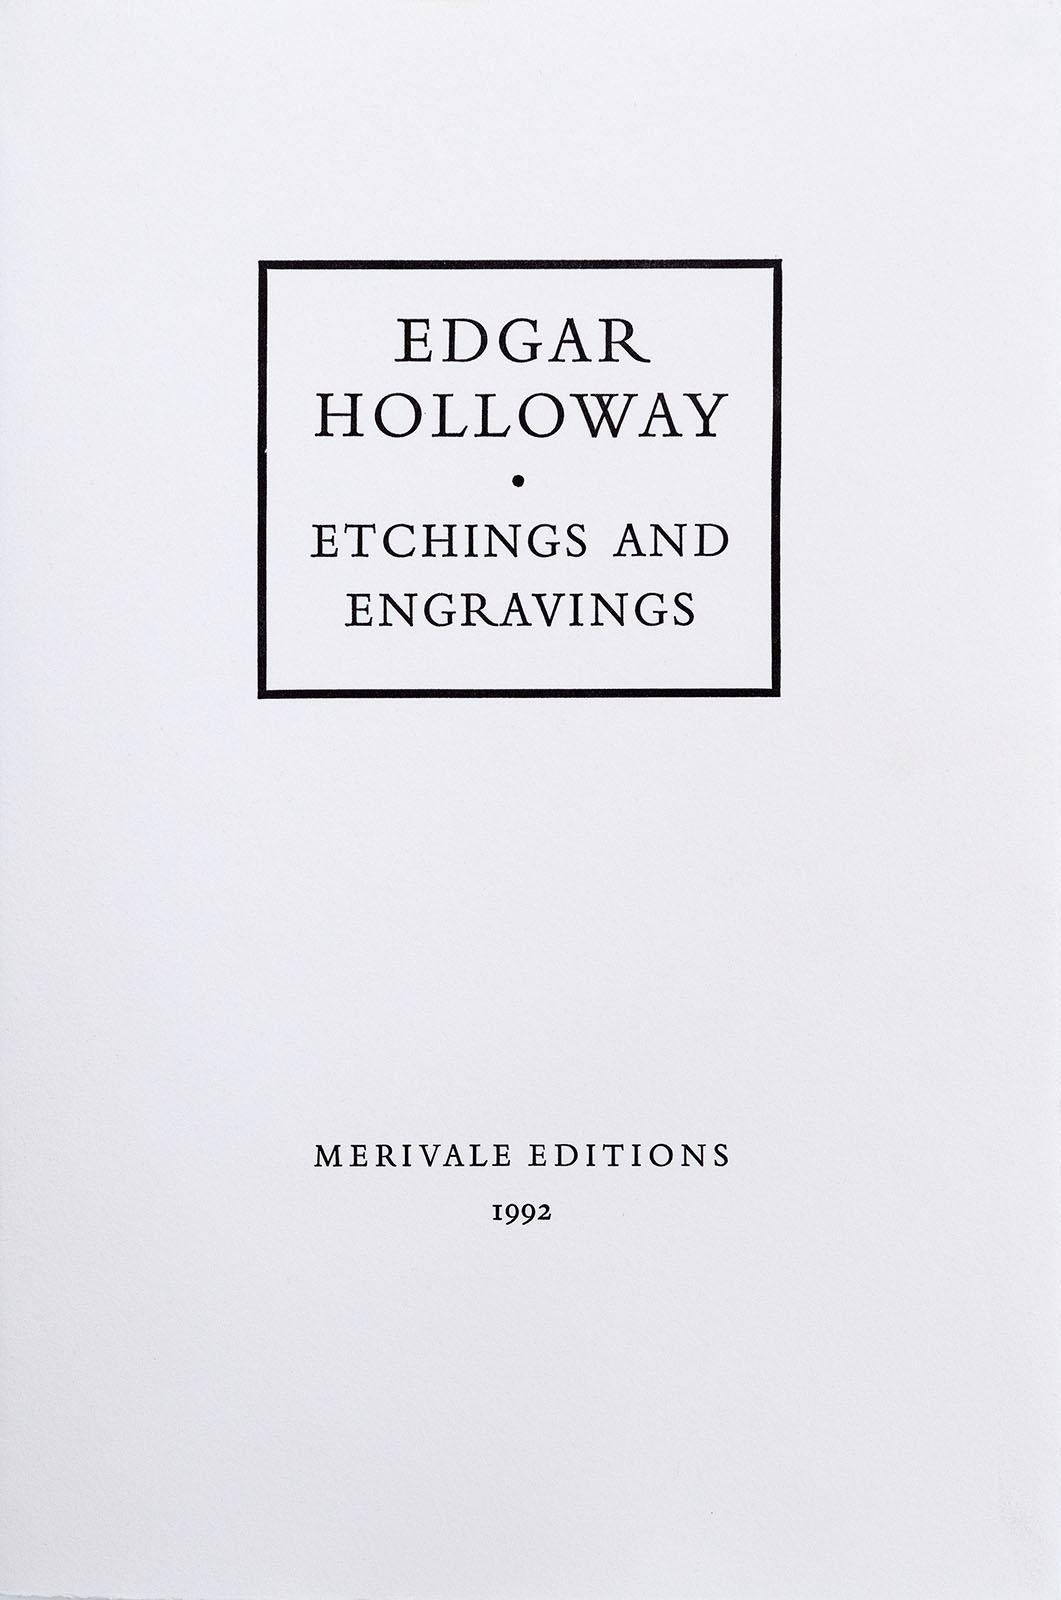 Folio of 6 signed etchings and engravings by Edgar Holloway - Other Art Style Print by Edgar A. Holloway